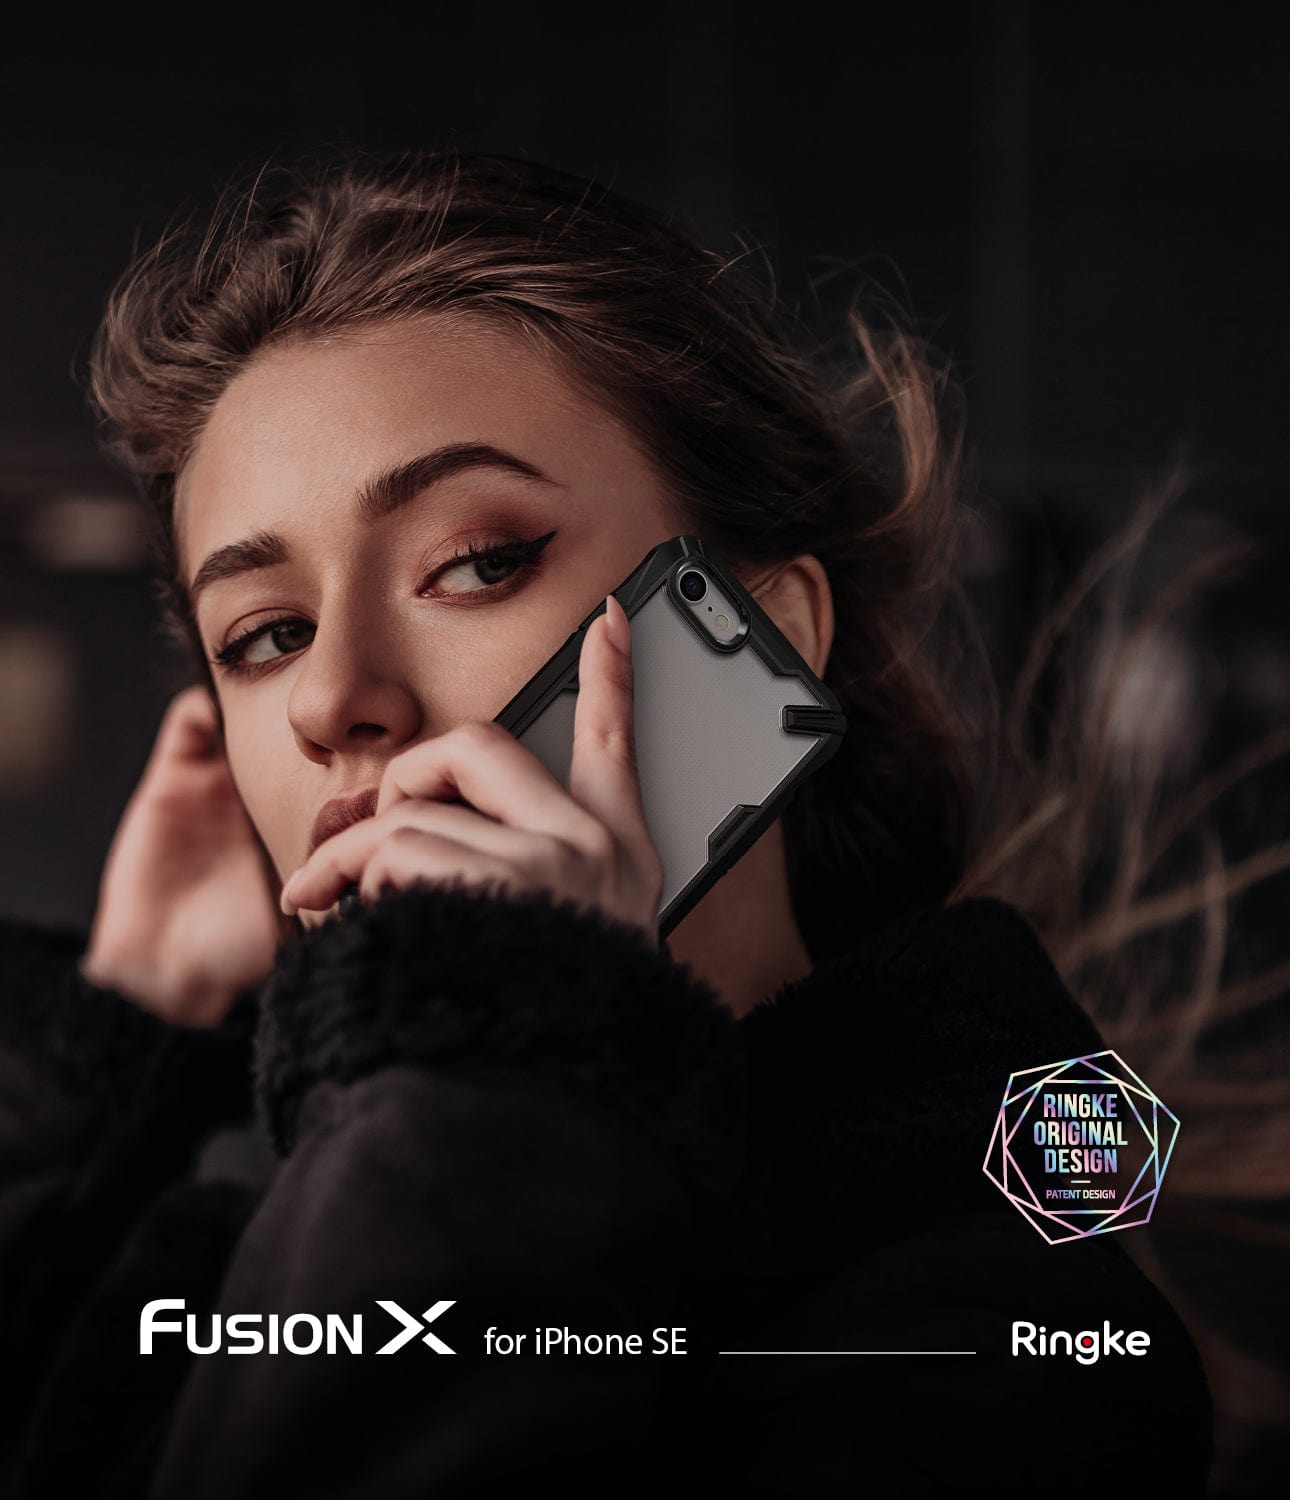 Discover the Ringke Fusion Case, compatible with iPhone SE, iPhone 7, and iPhone 8